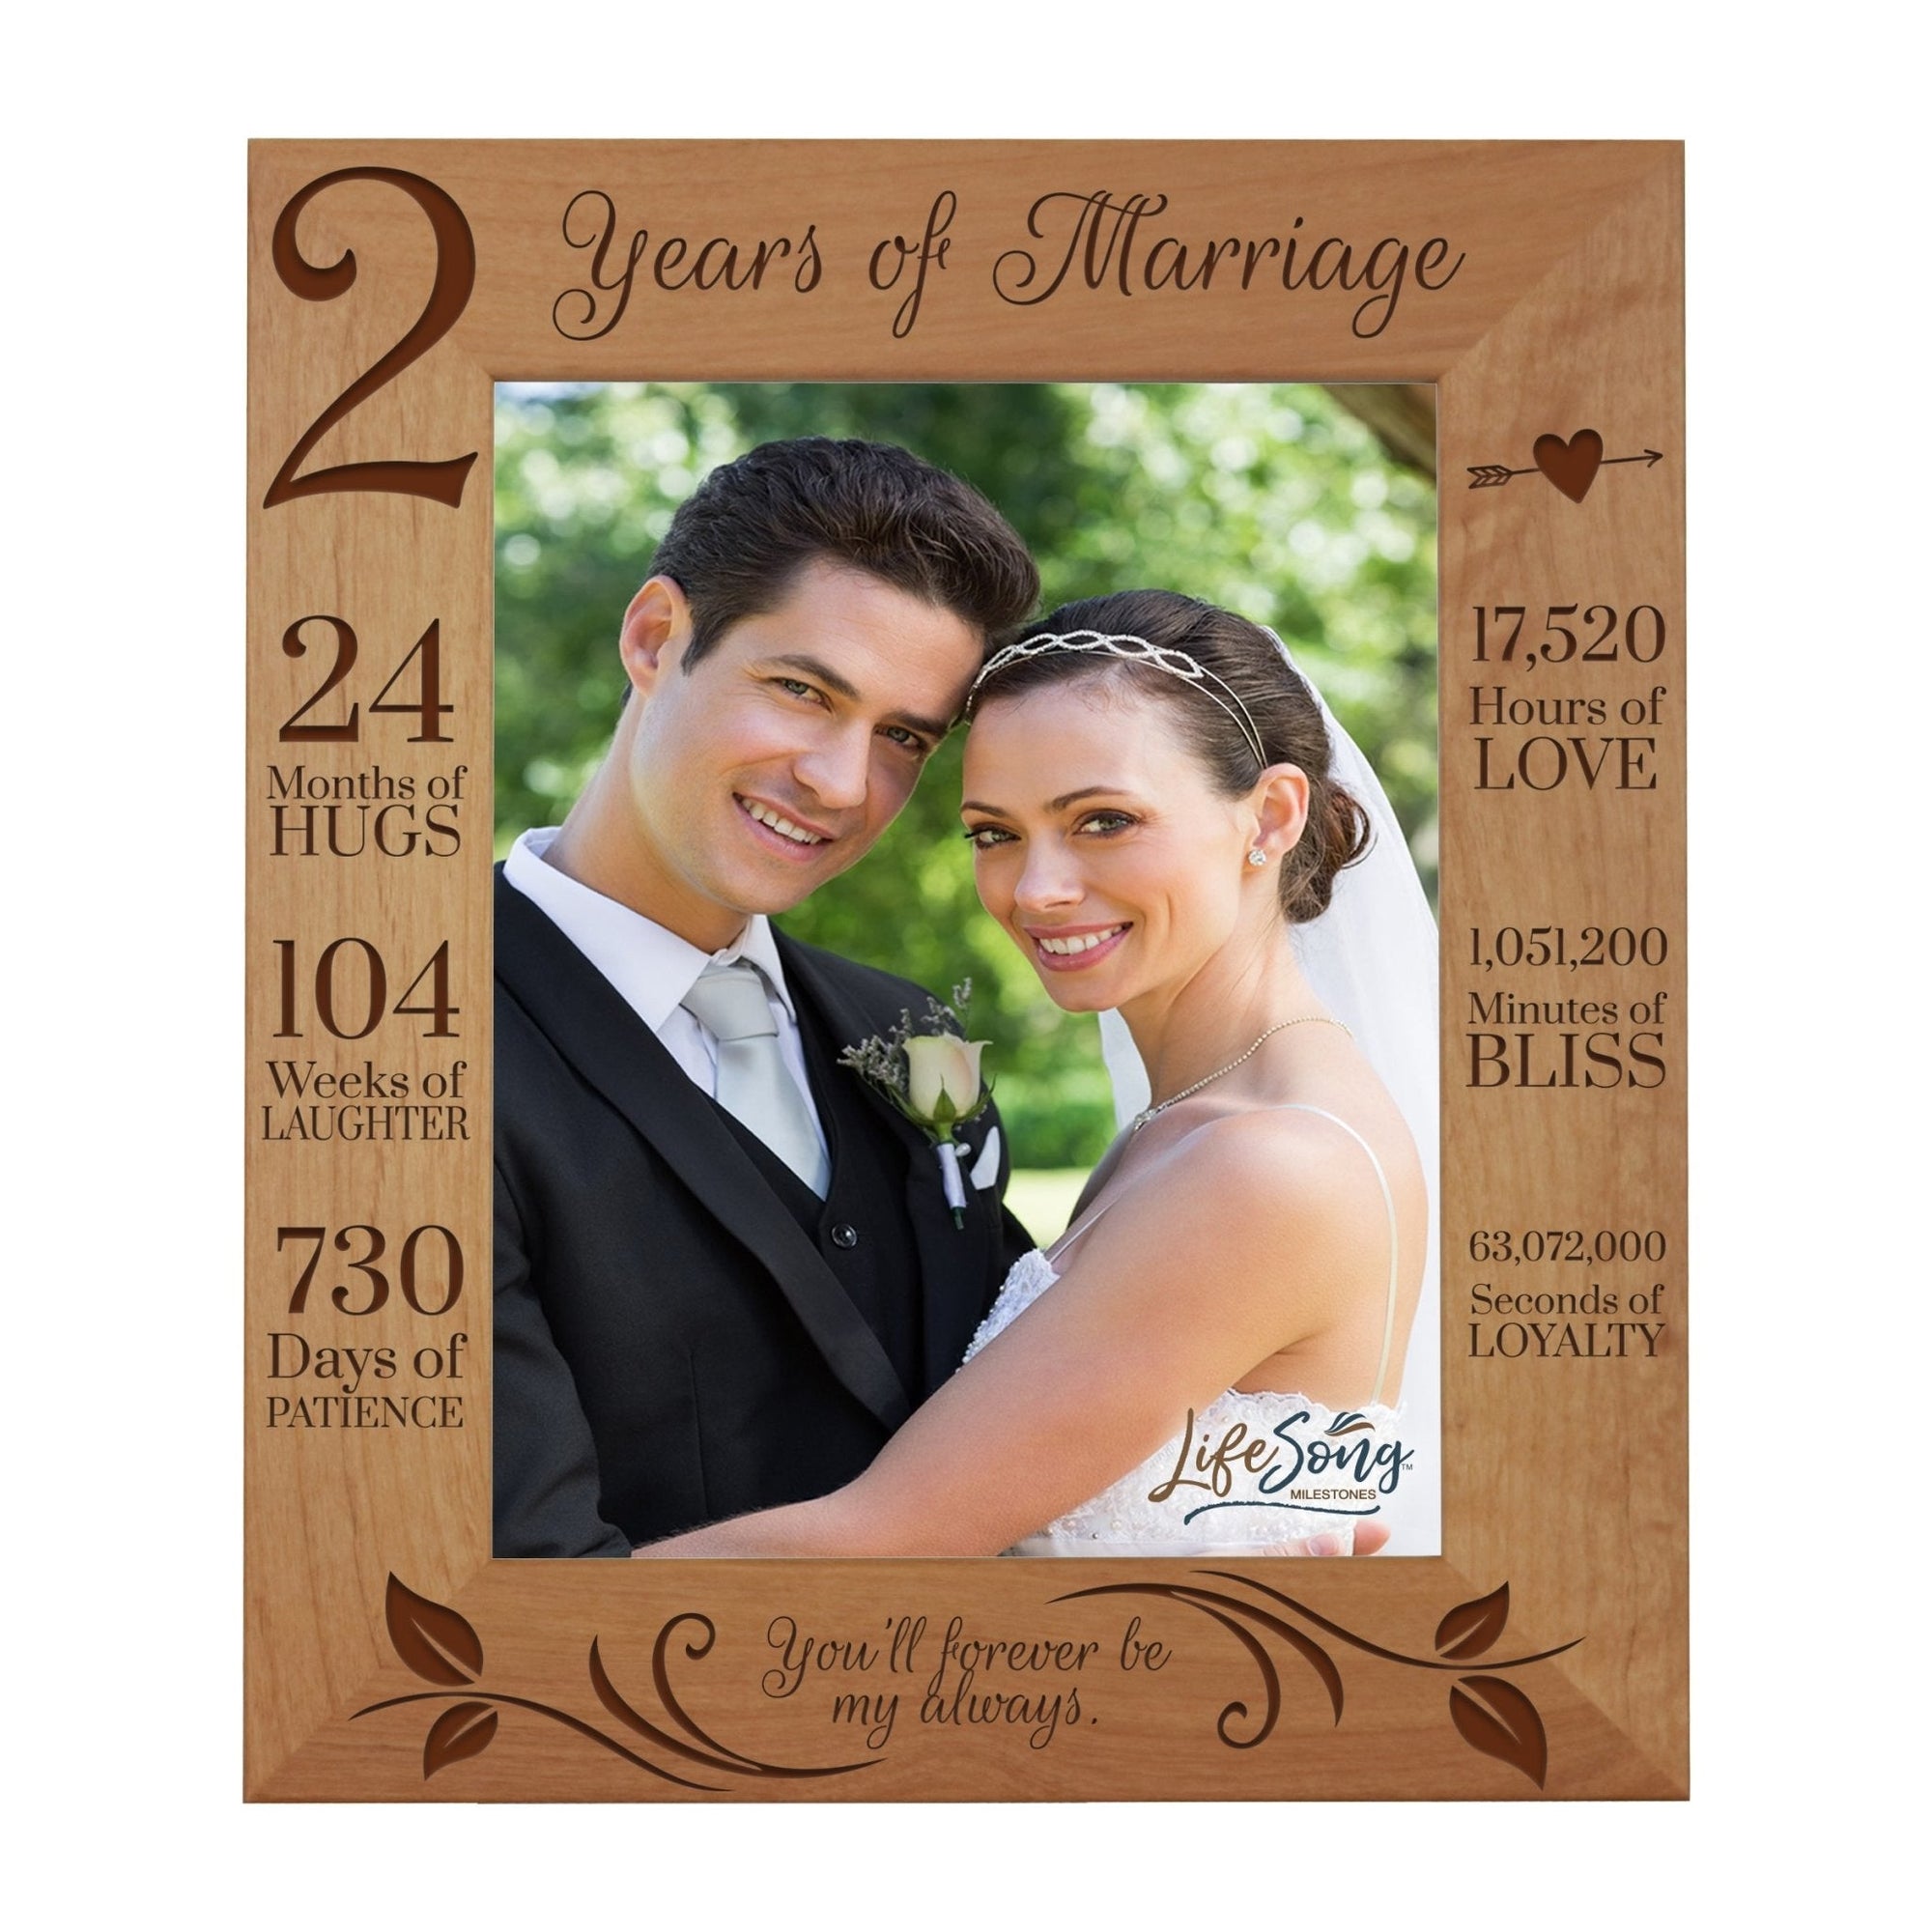 Couples 2nd Wedding Anniversary Photo Frame Home Decor Gift Ideas - Forever Be My Always - LifeSong Milestones